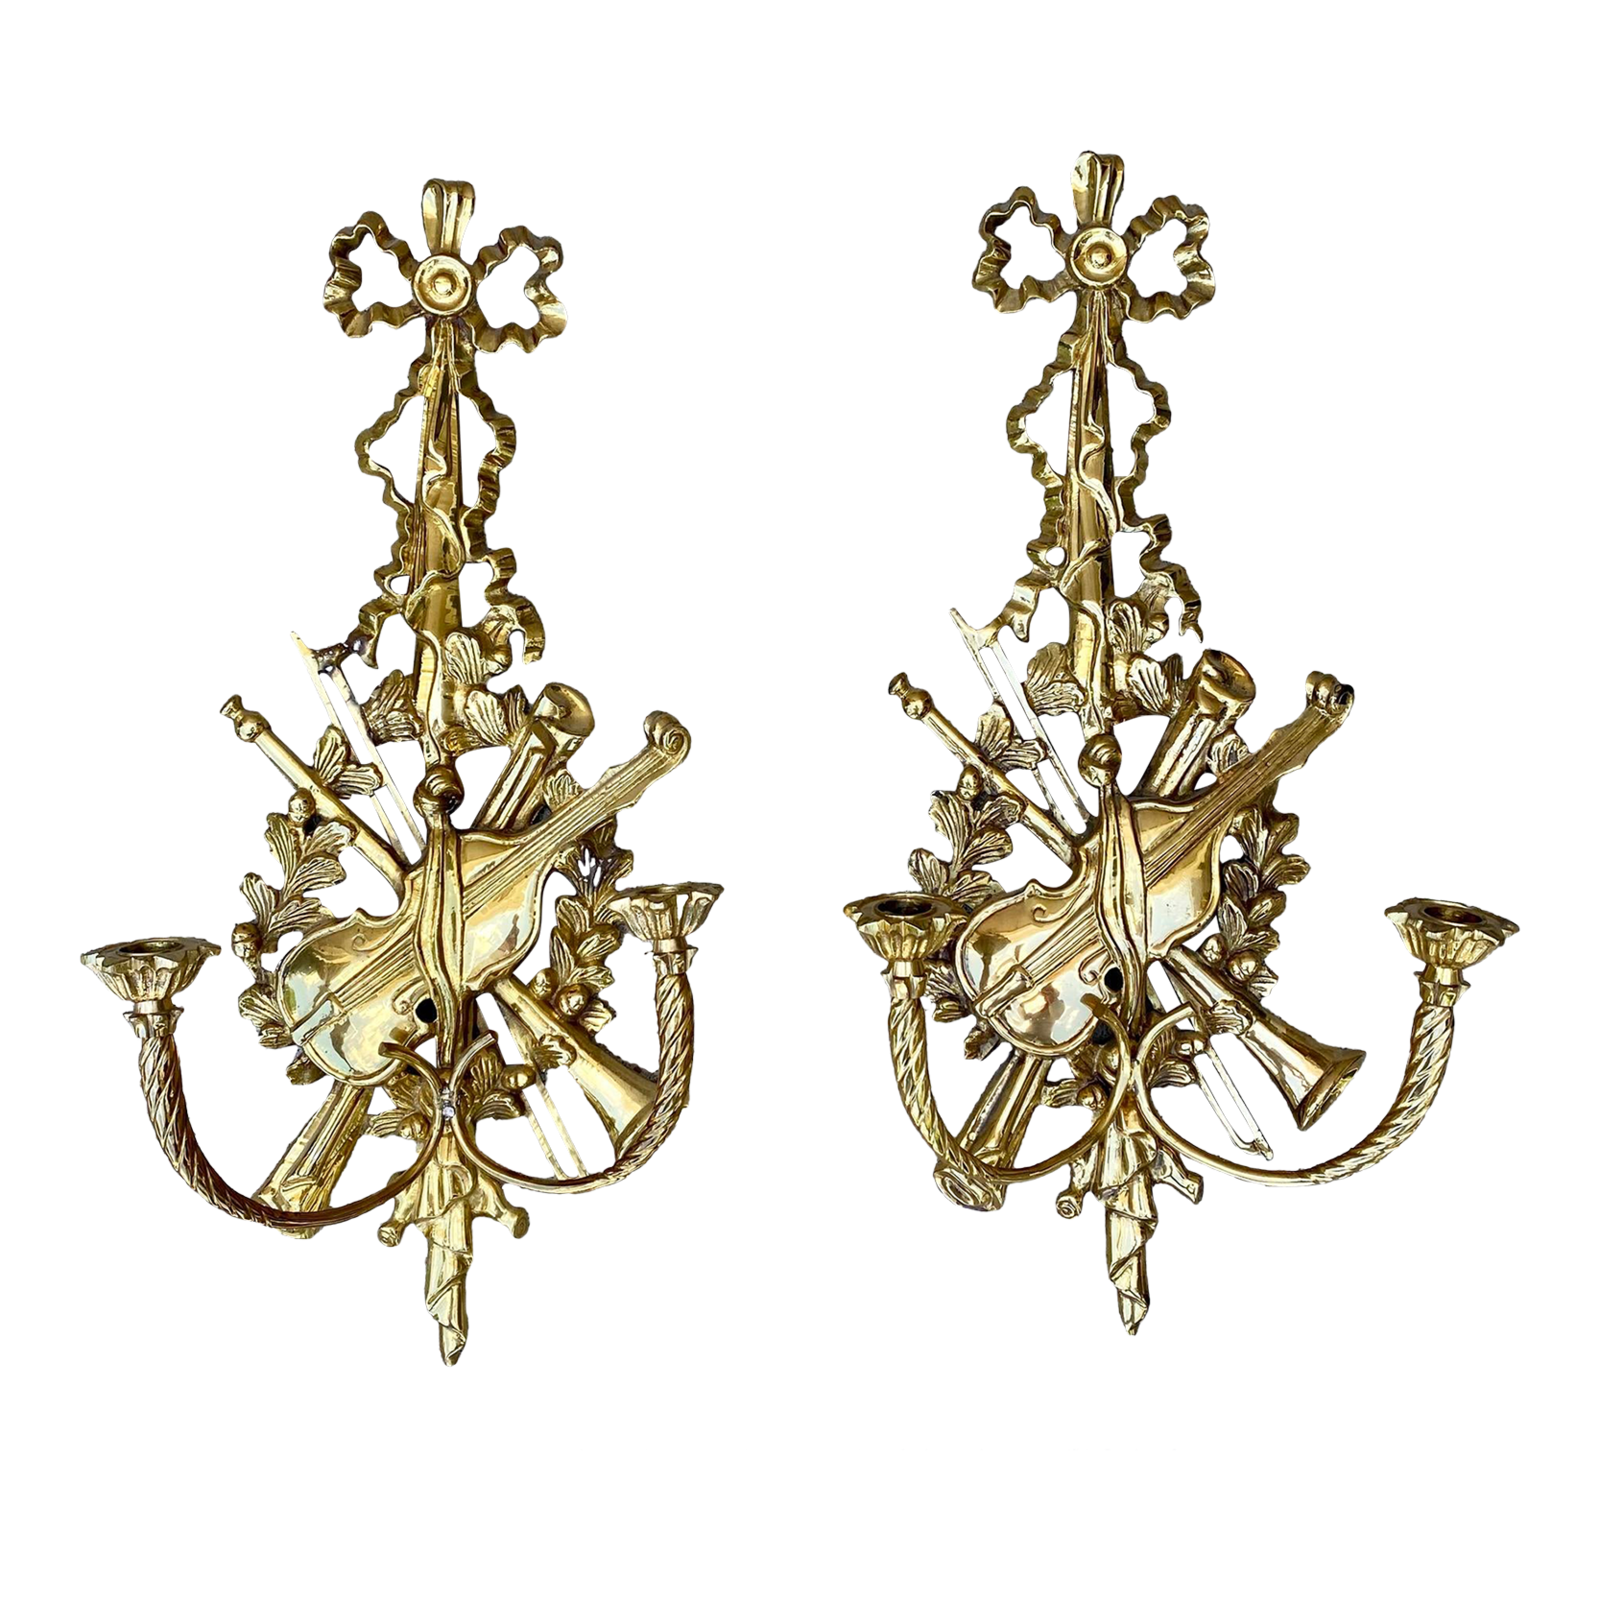 Hollywood Regency Solid Brass Candle Sconces, Violin Music Theme-A Pair - $650.00